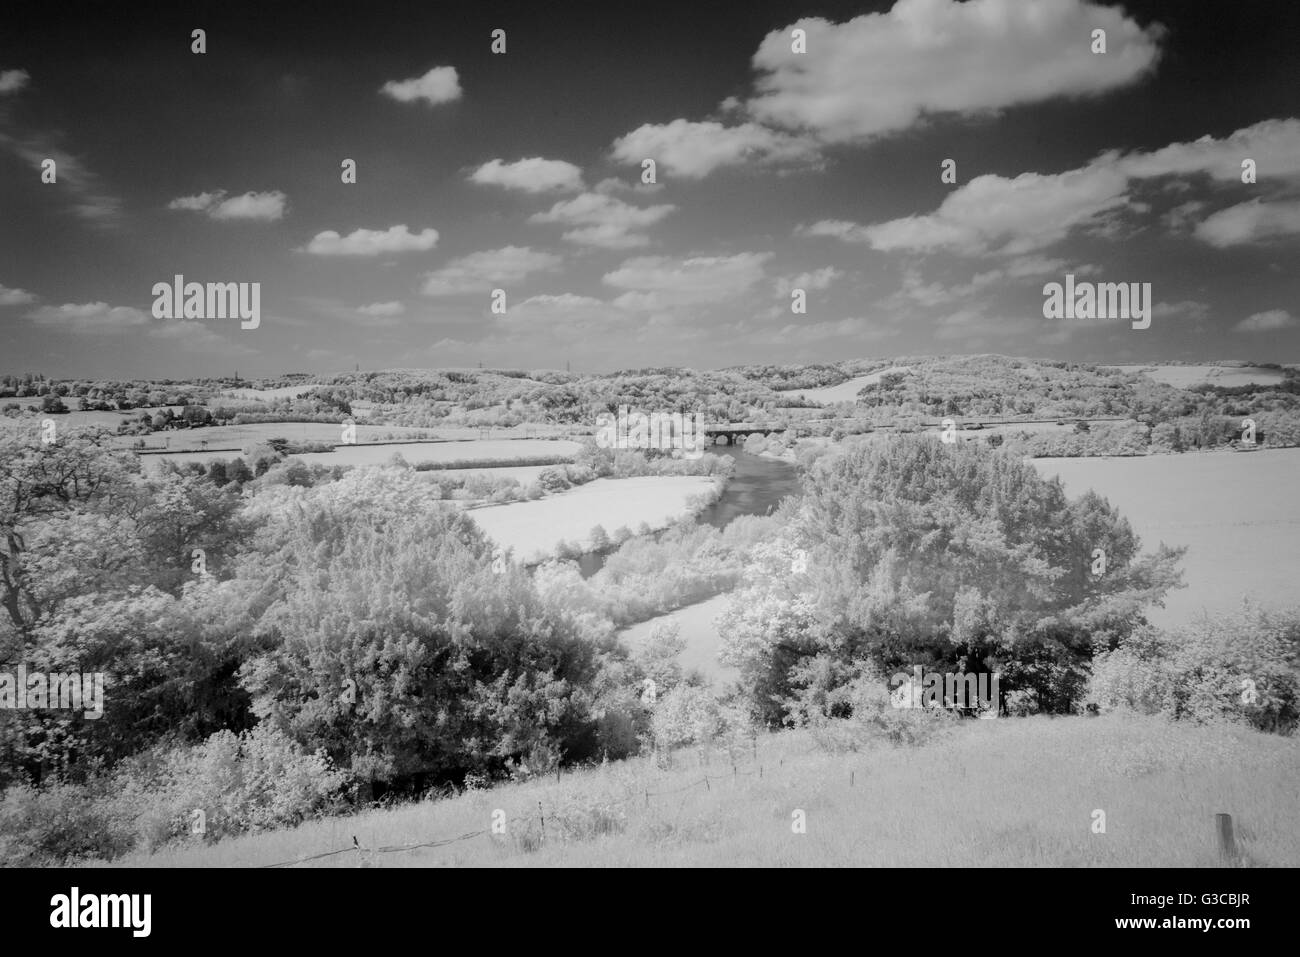 View of the Thames Valley at Hartslock, Oxfordshire, UK. Using a R72 infra-red filter to eliminate most of the visible spectrum. Stock Photo